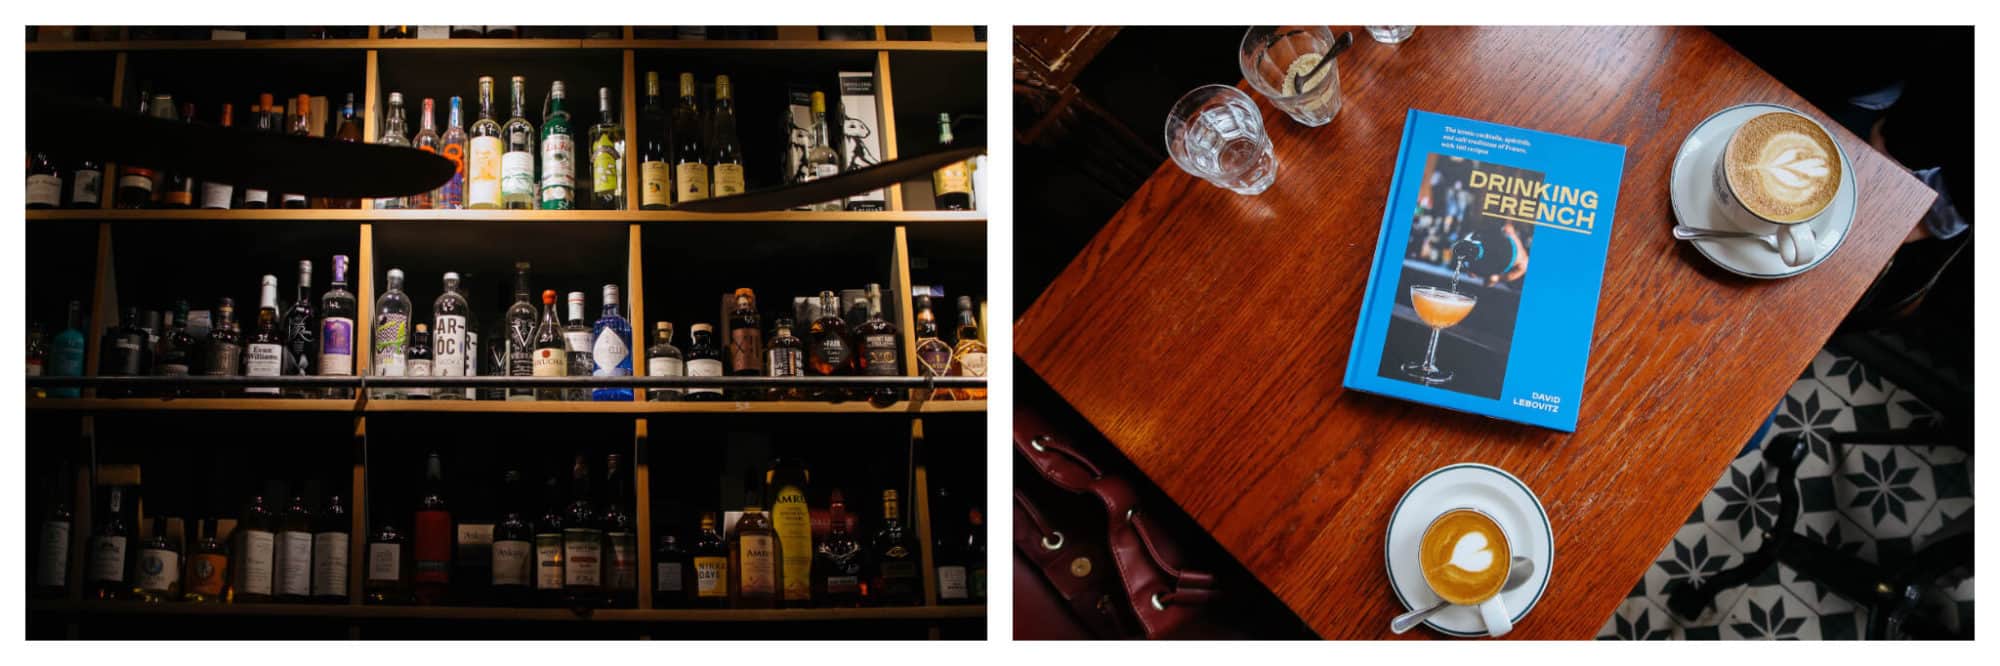 Left, shelves stacked with batch-made liquors and spirits in Paris. Right, David Lebovitz's new book 'Drinking French'.